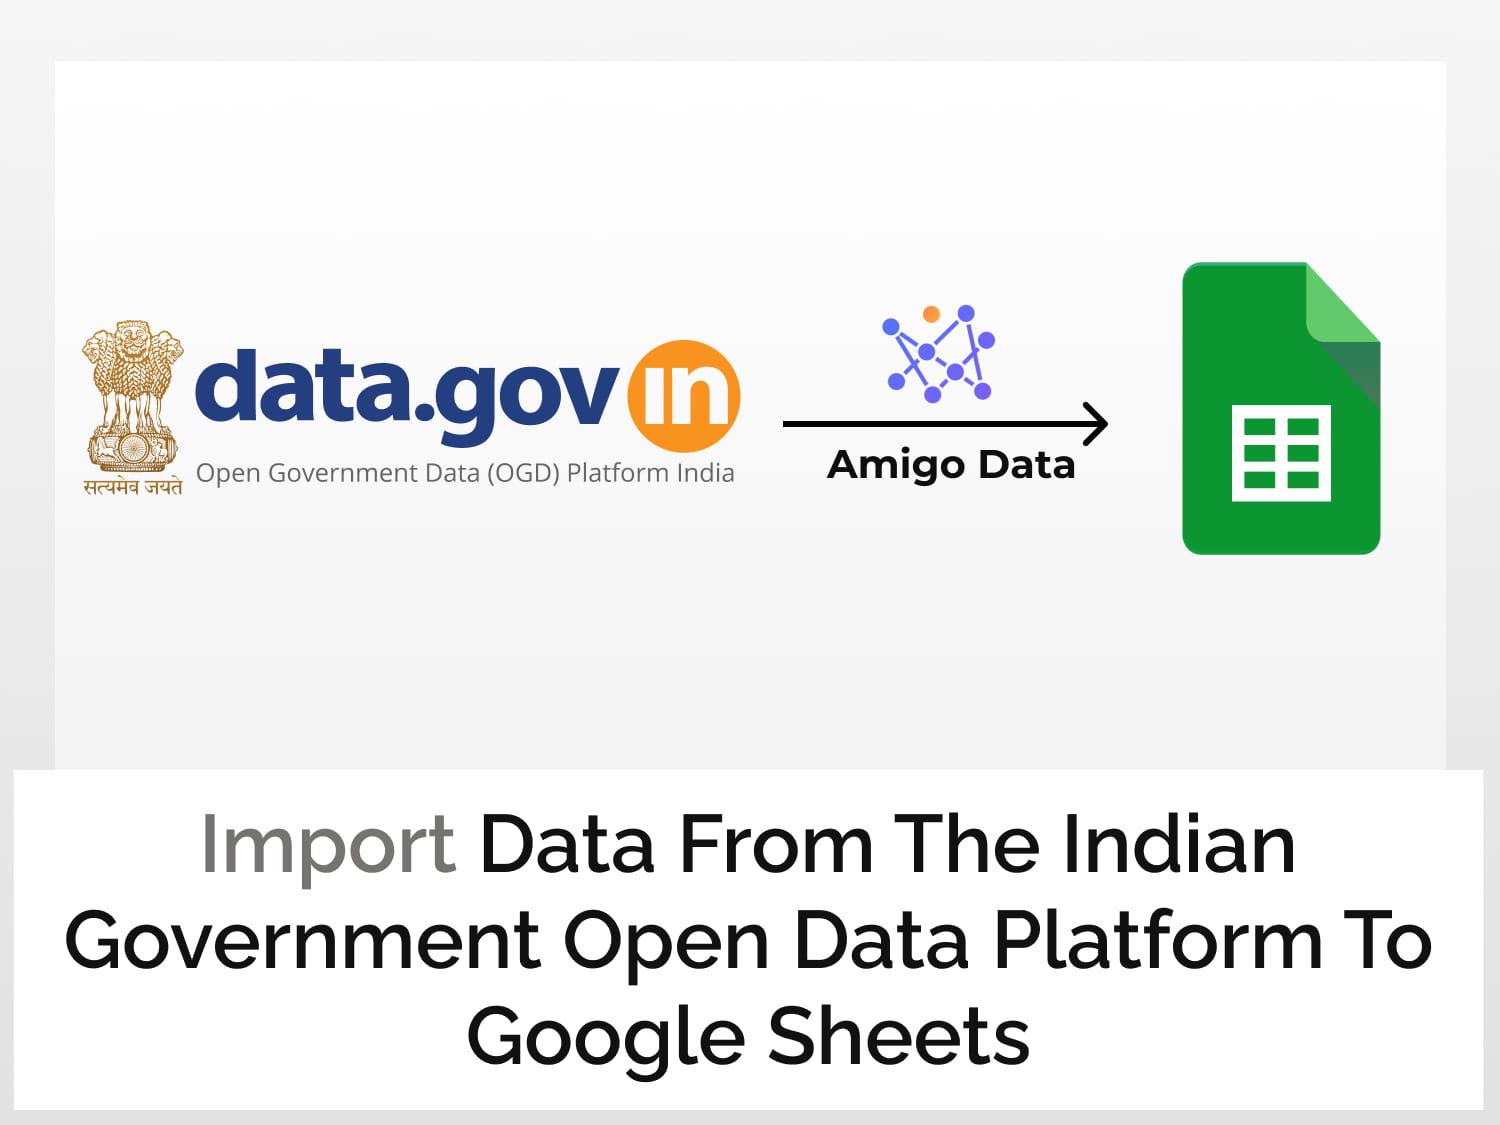 How to import Indian government open data to Google Sheets